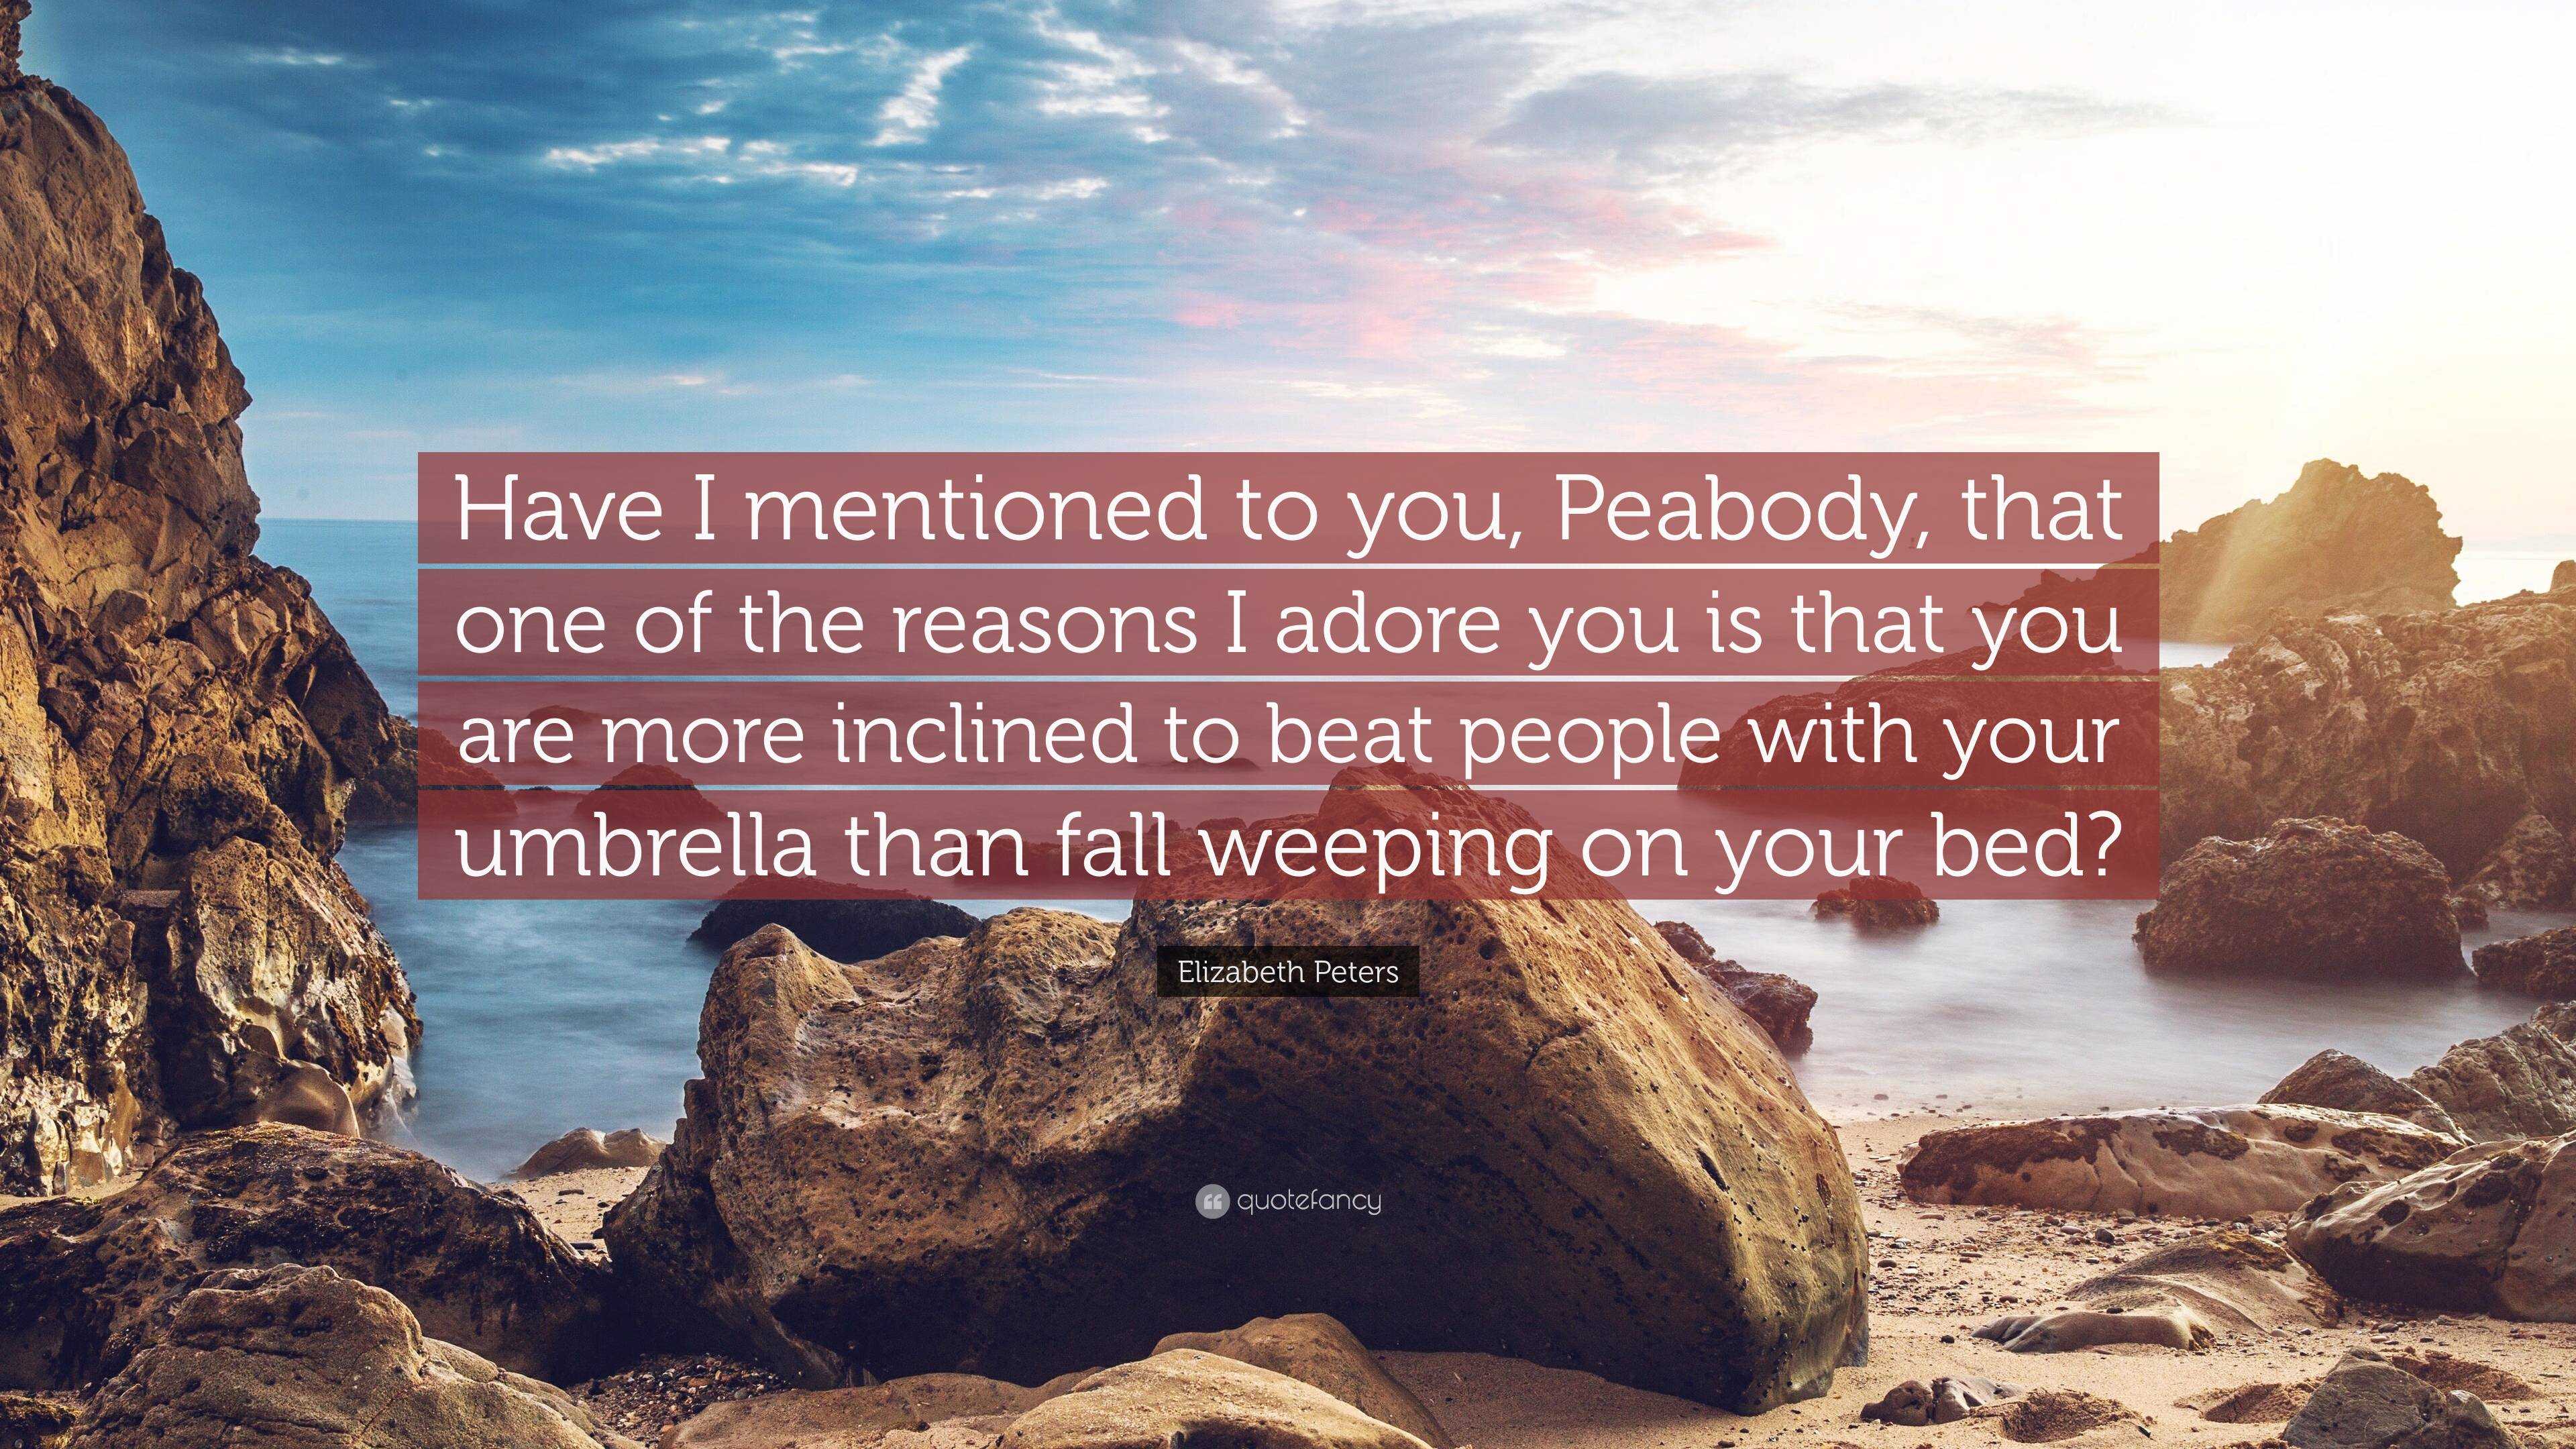 Elizabeth Peters Quote: “Have I mentioned to you, Peabody, that one of ...